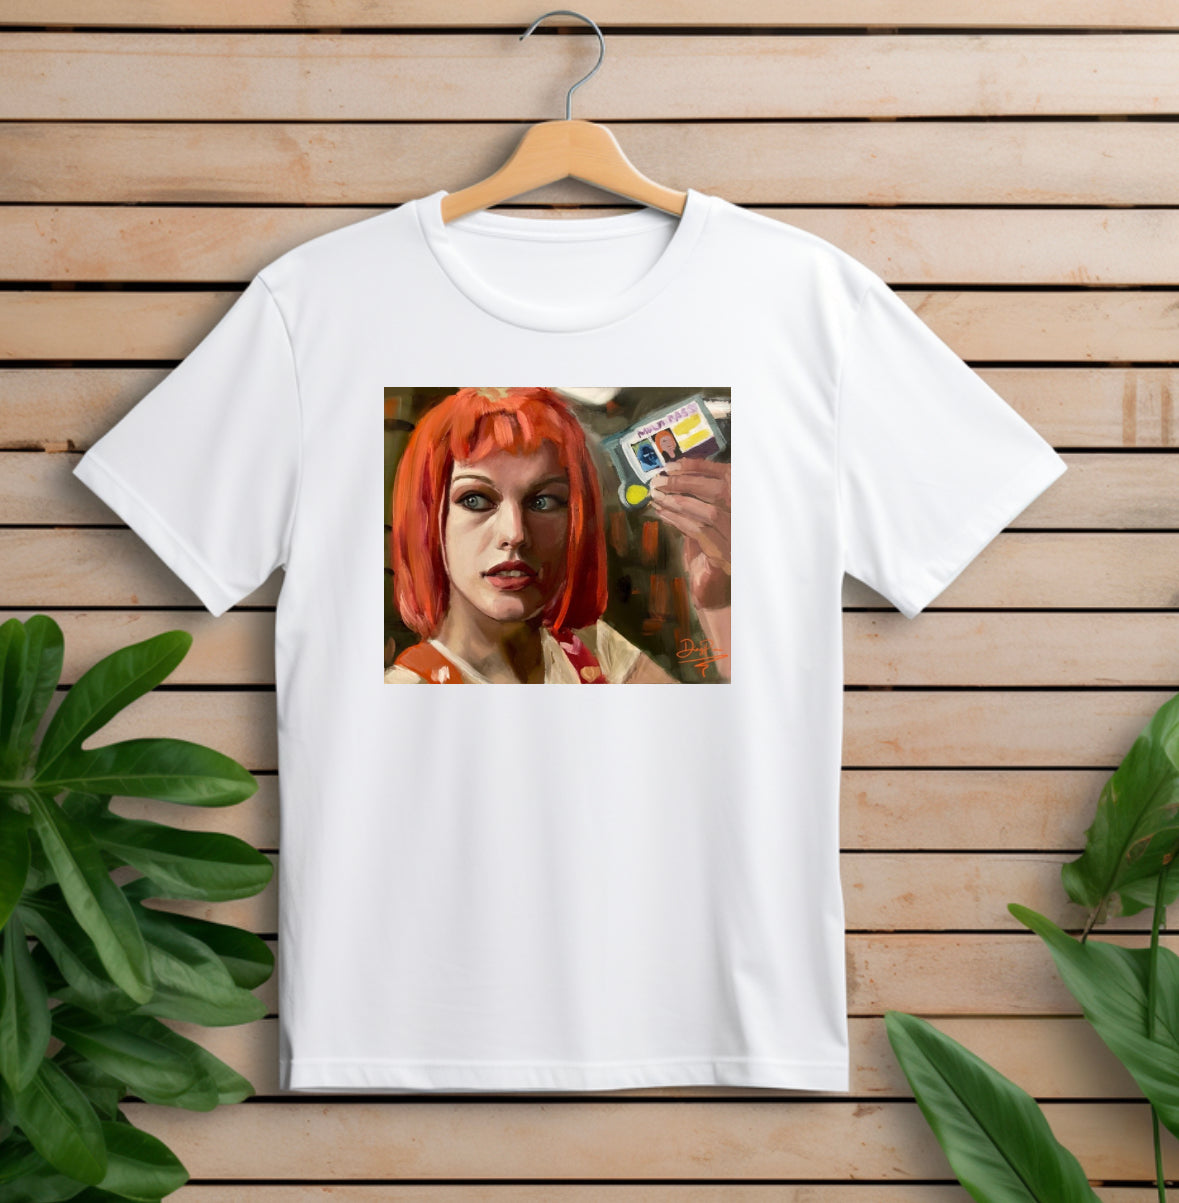 The Fifth element T-Shirt